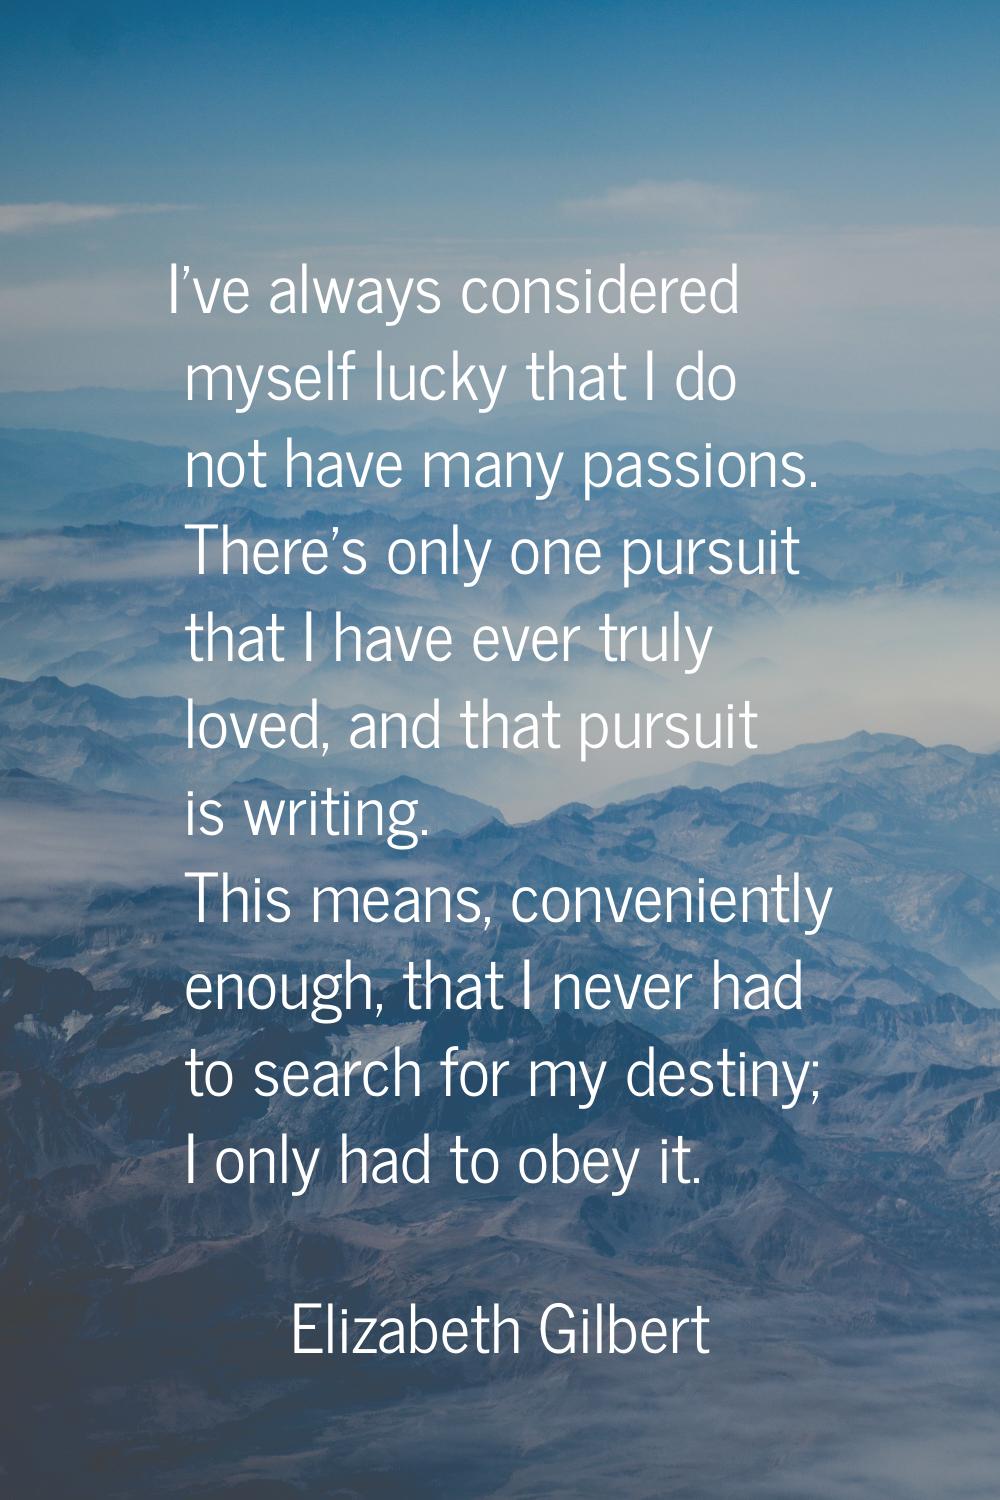 I've always considered myself lucky that I do not have many passions. There's only one pursuit that